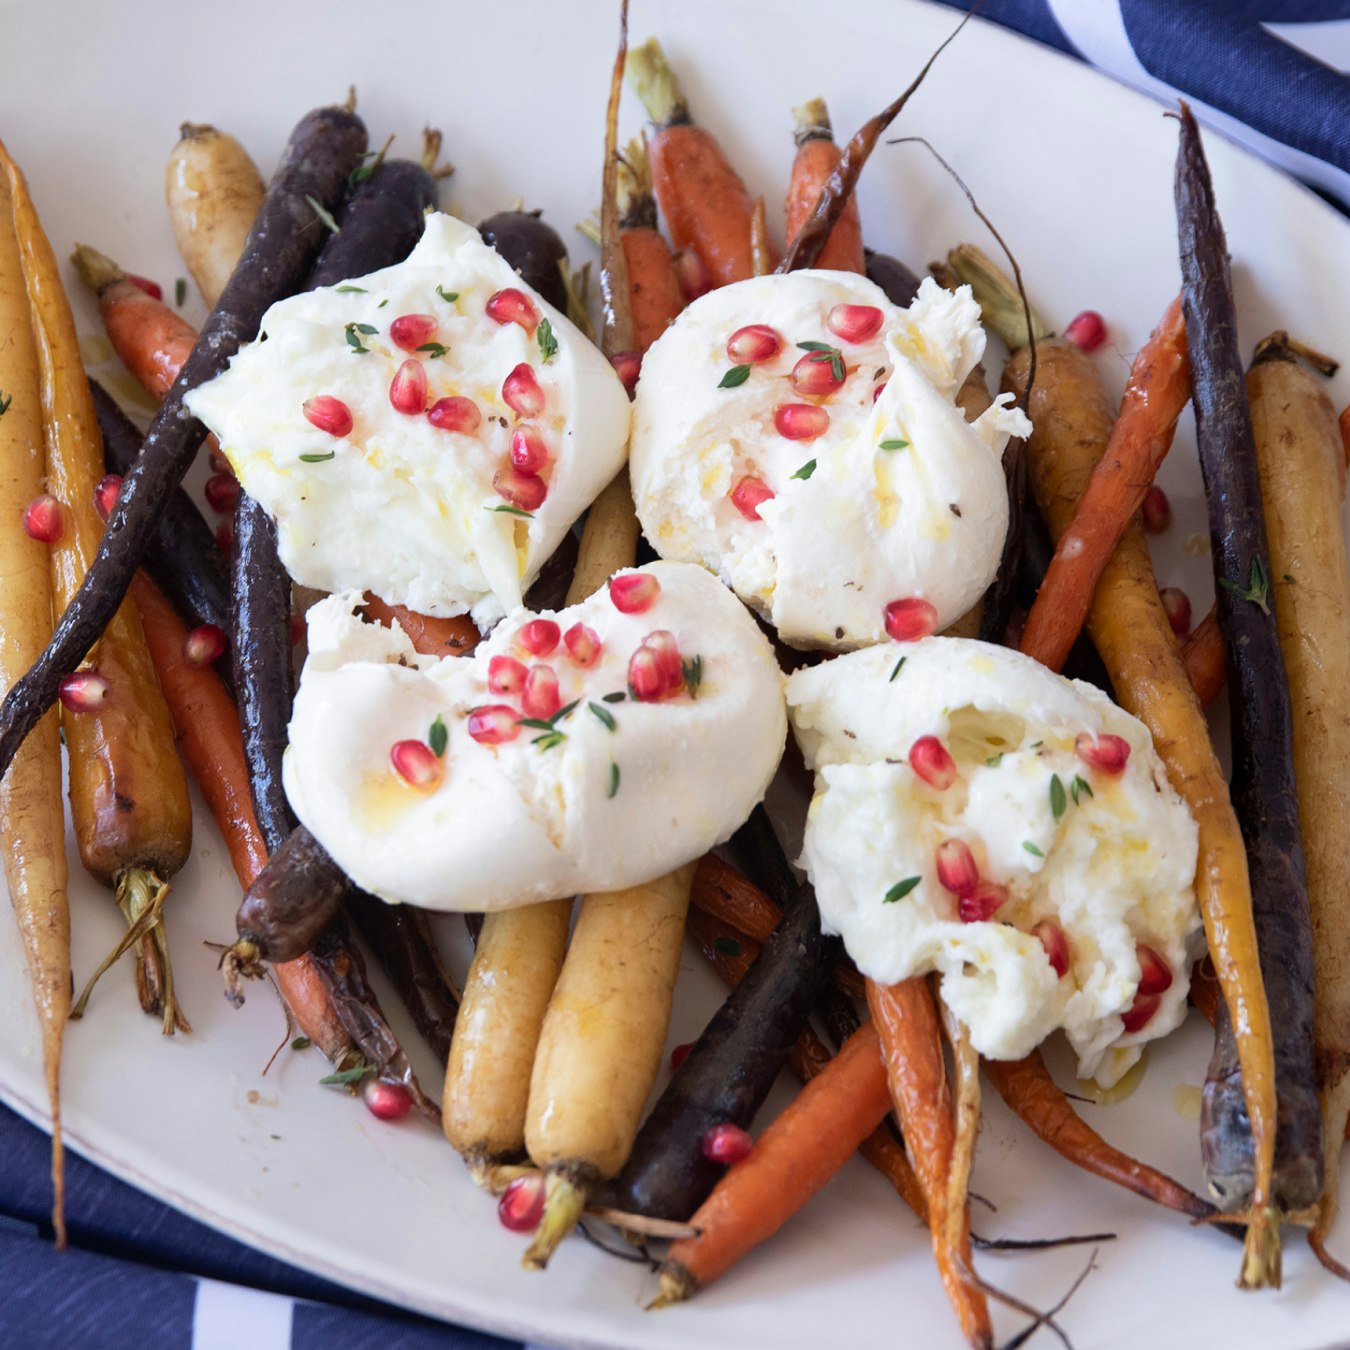 View item Roasted Vegetables with Burrata & Pomegranate